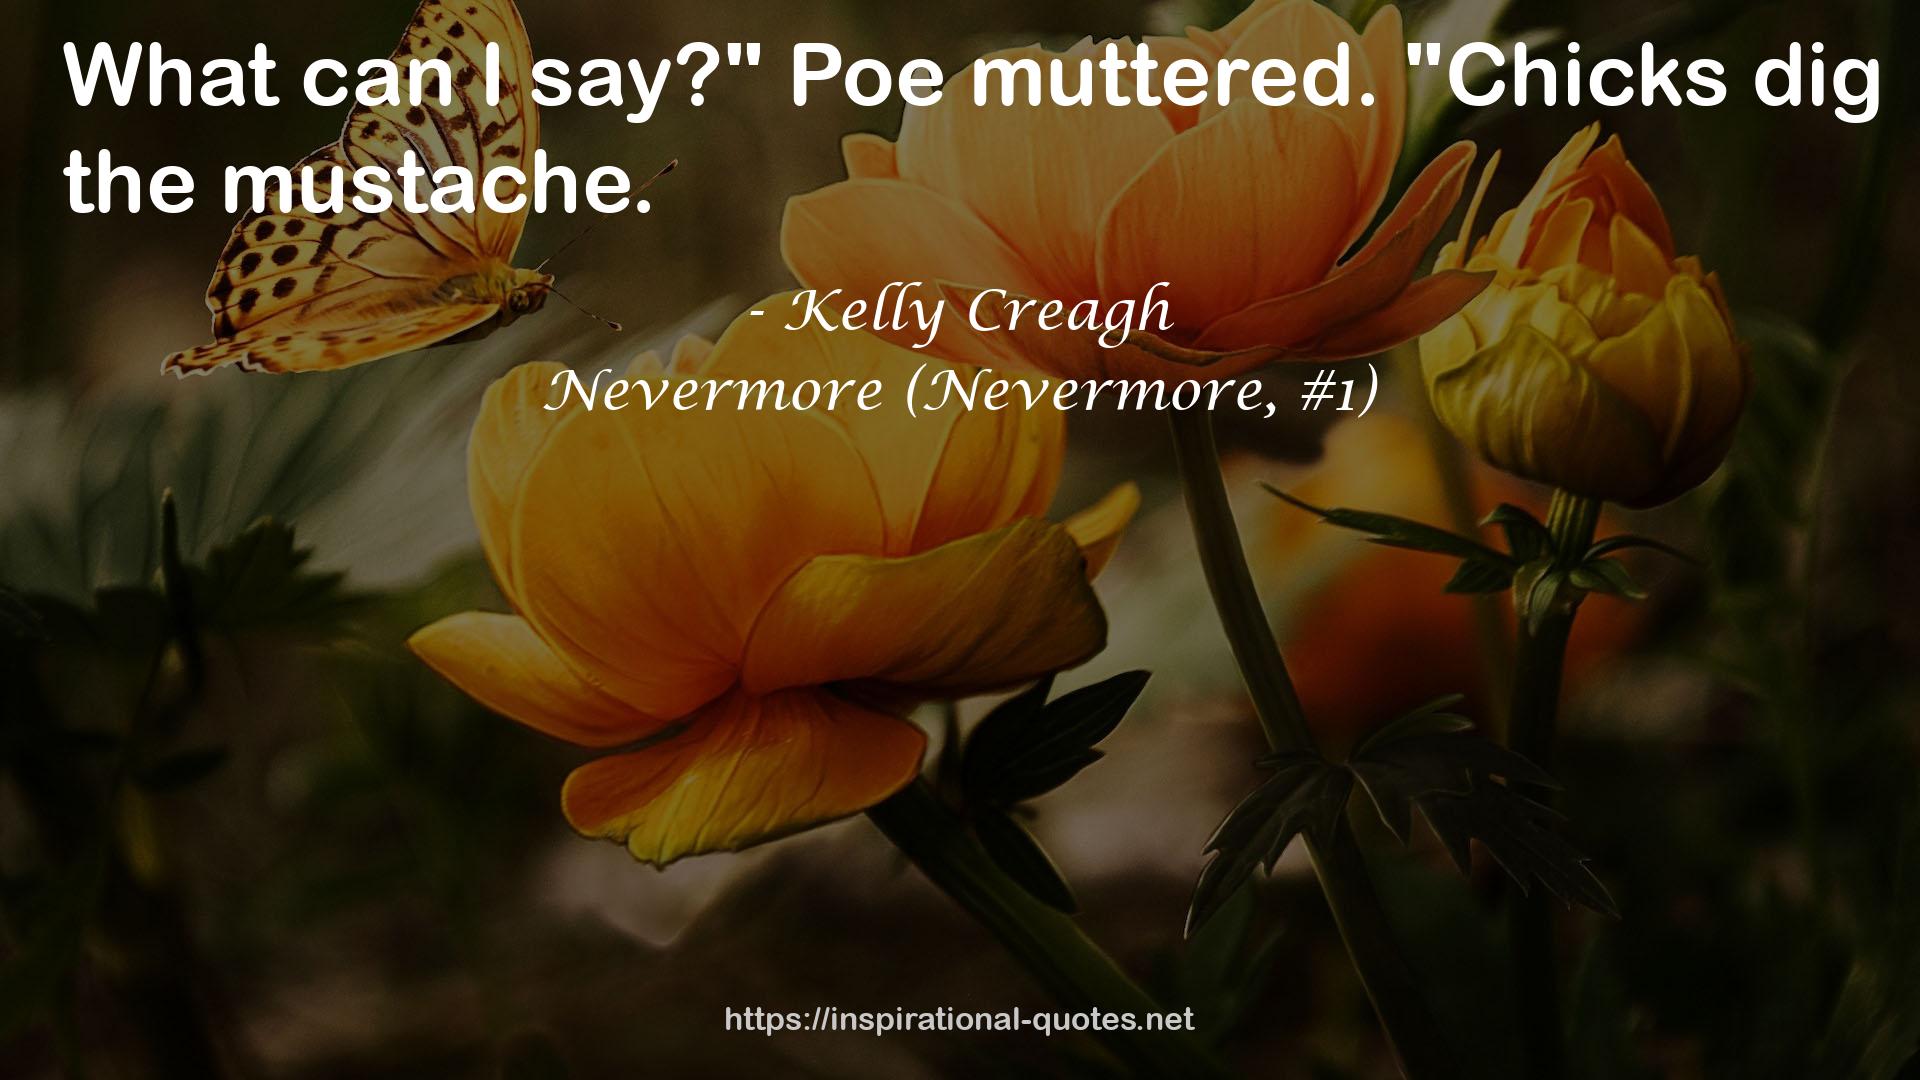 Nevermore (Nevermore, #1) QUOTES